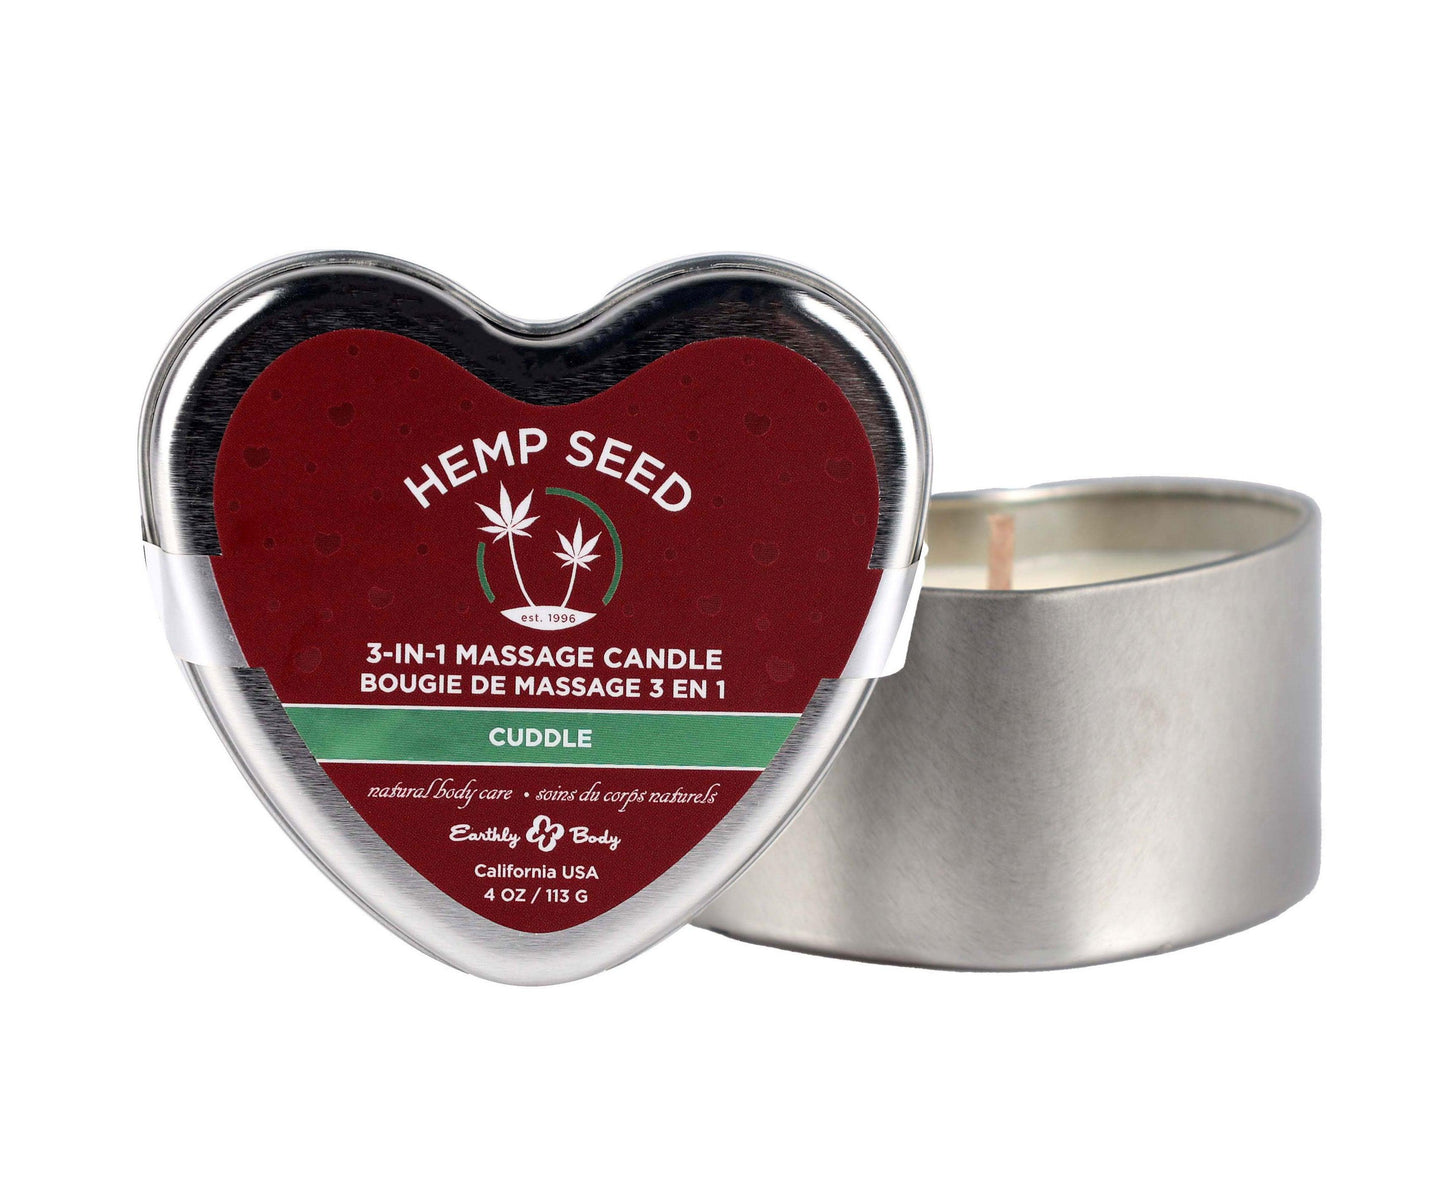 3-in-1 Massage Candle - Cuddle - 4 Oz - Love It Wet